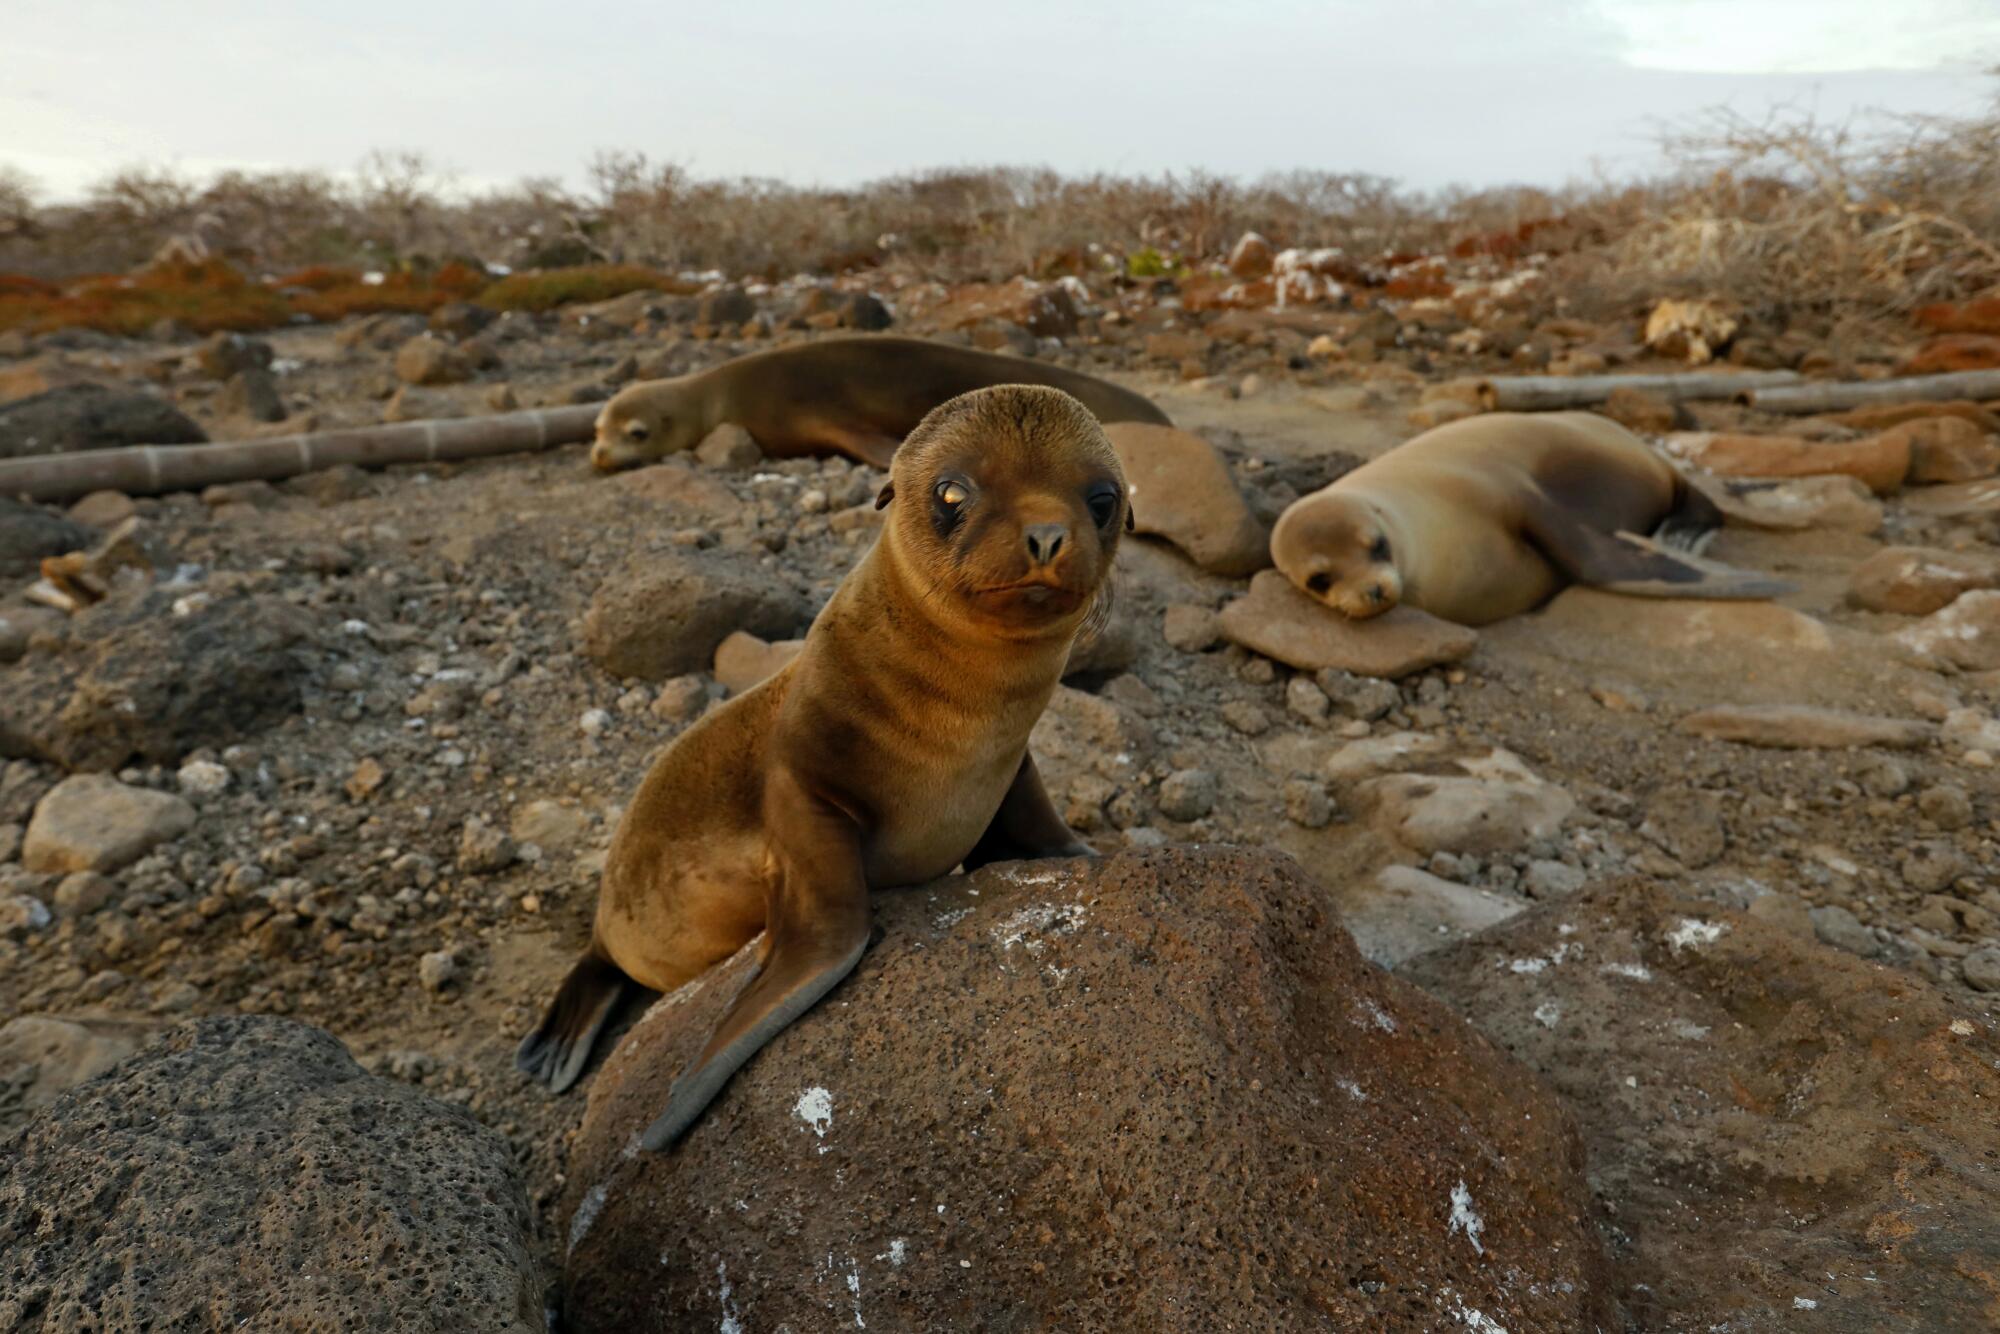 With few tourists visiting the Galapagos, a baby sea lion has his first encounter with a human on North Seymour Island.